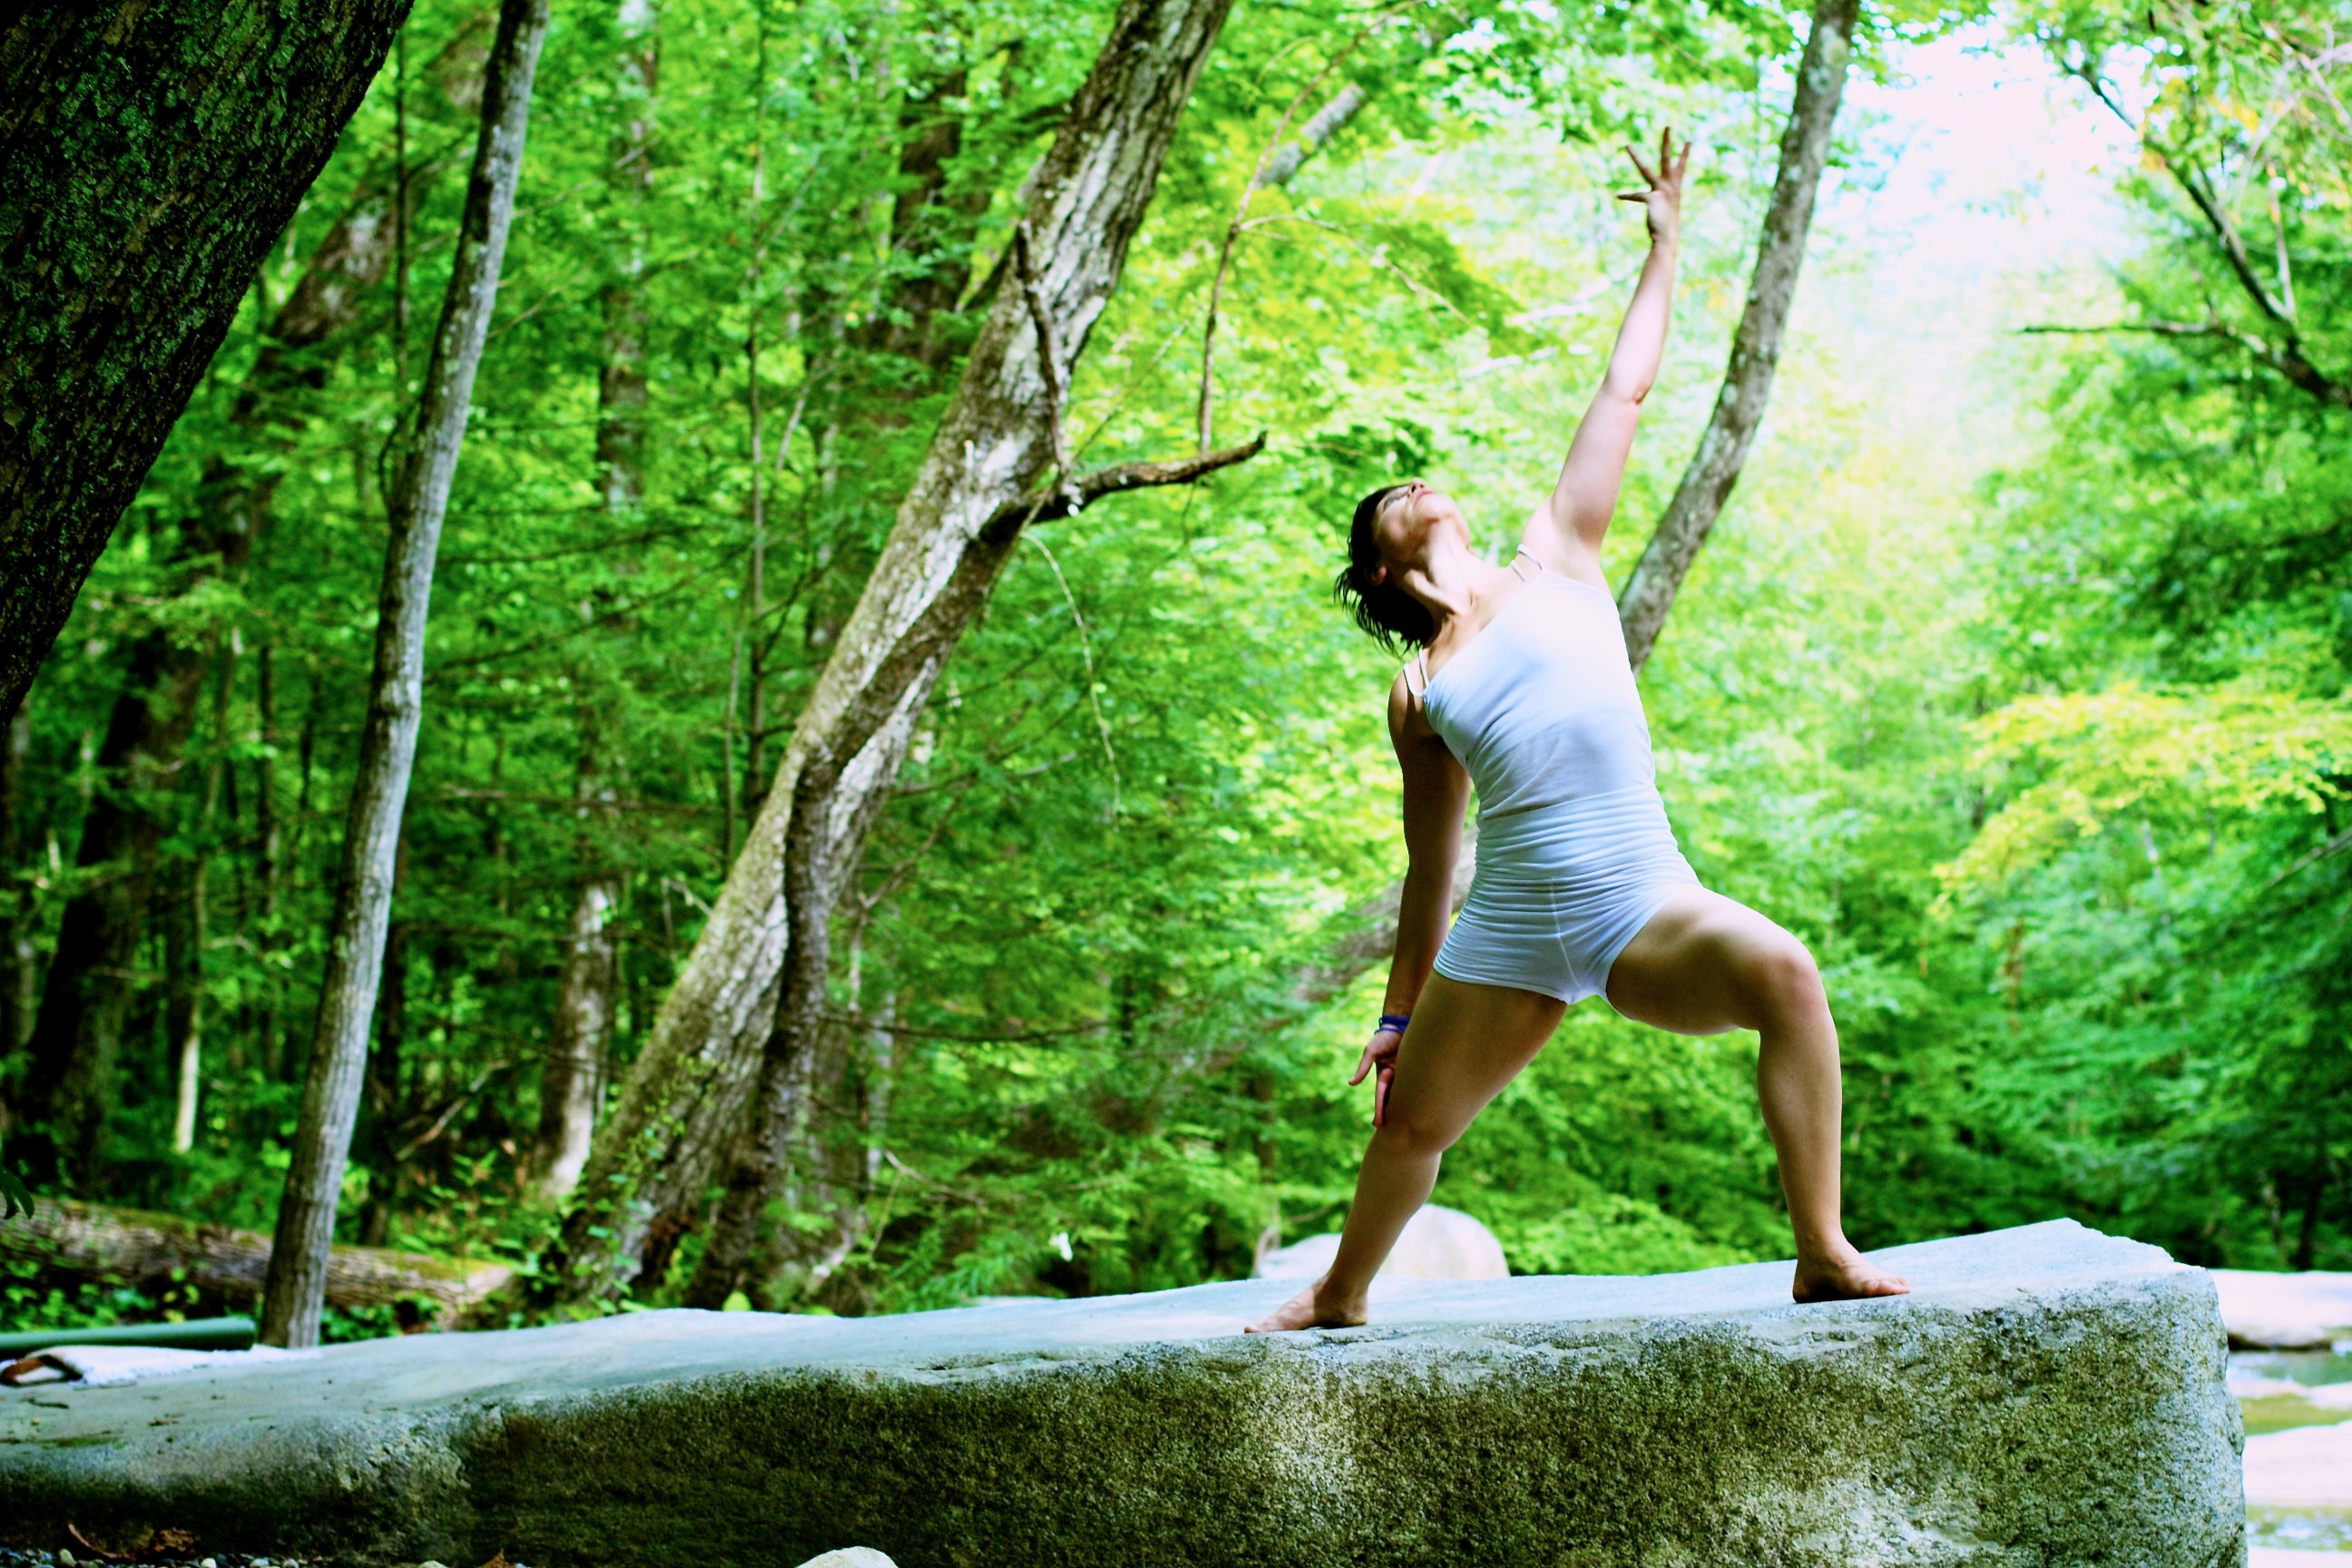 Which type of yoga suits your personality - Power or Vinyasa